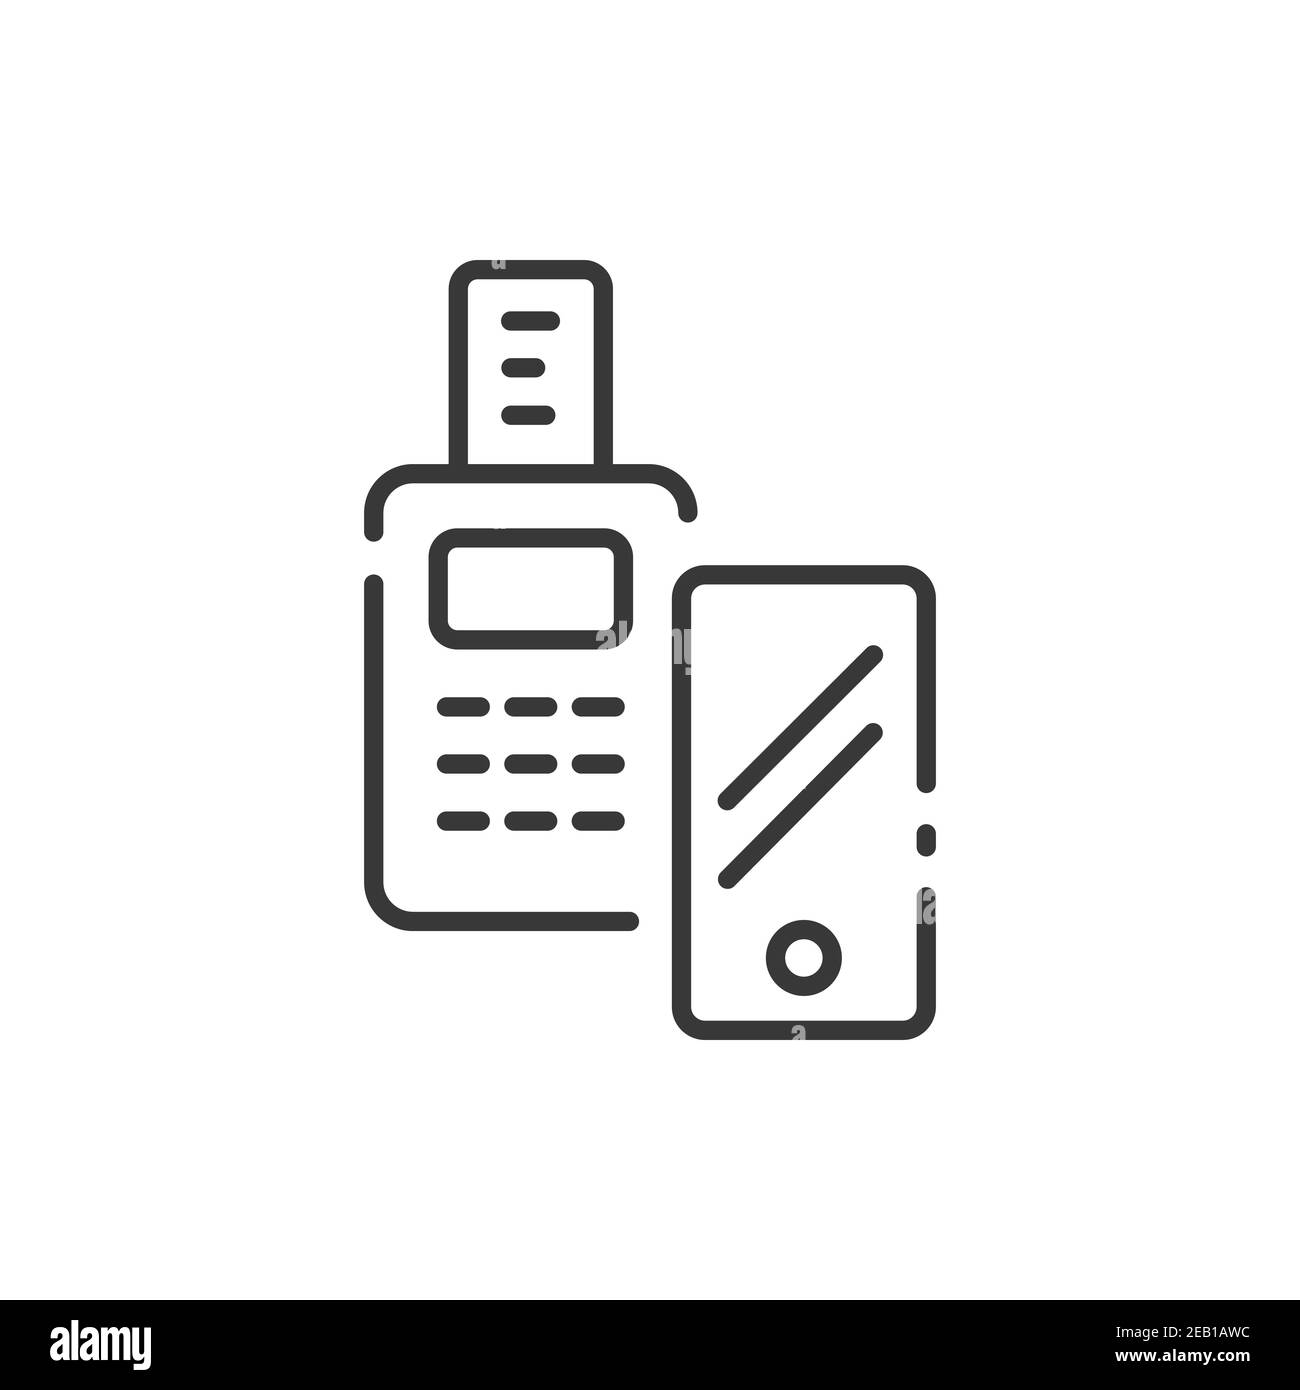 Transaction with smartphone thin line icon. Shipping terminal payment. Pay with mobile. Isolated outline commerce vector illustration Stock Vector